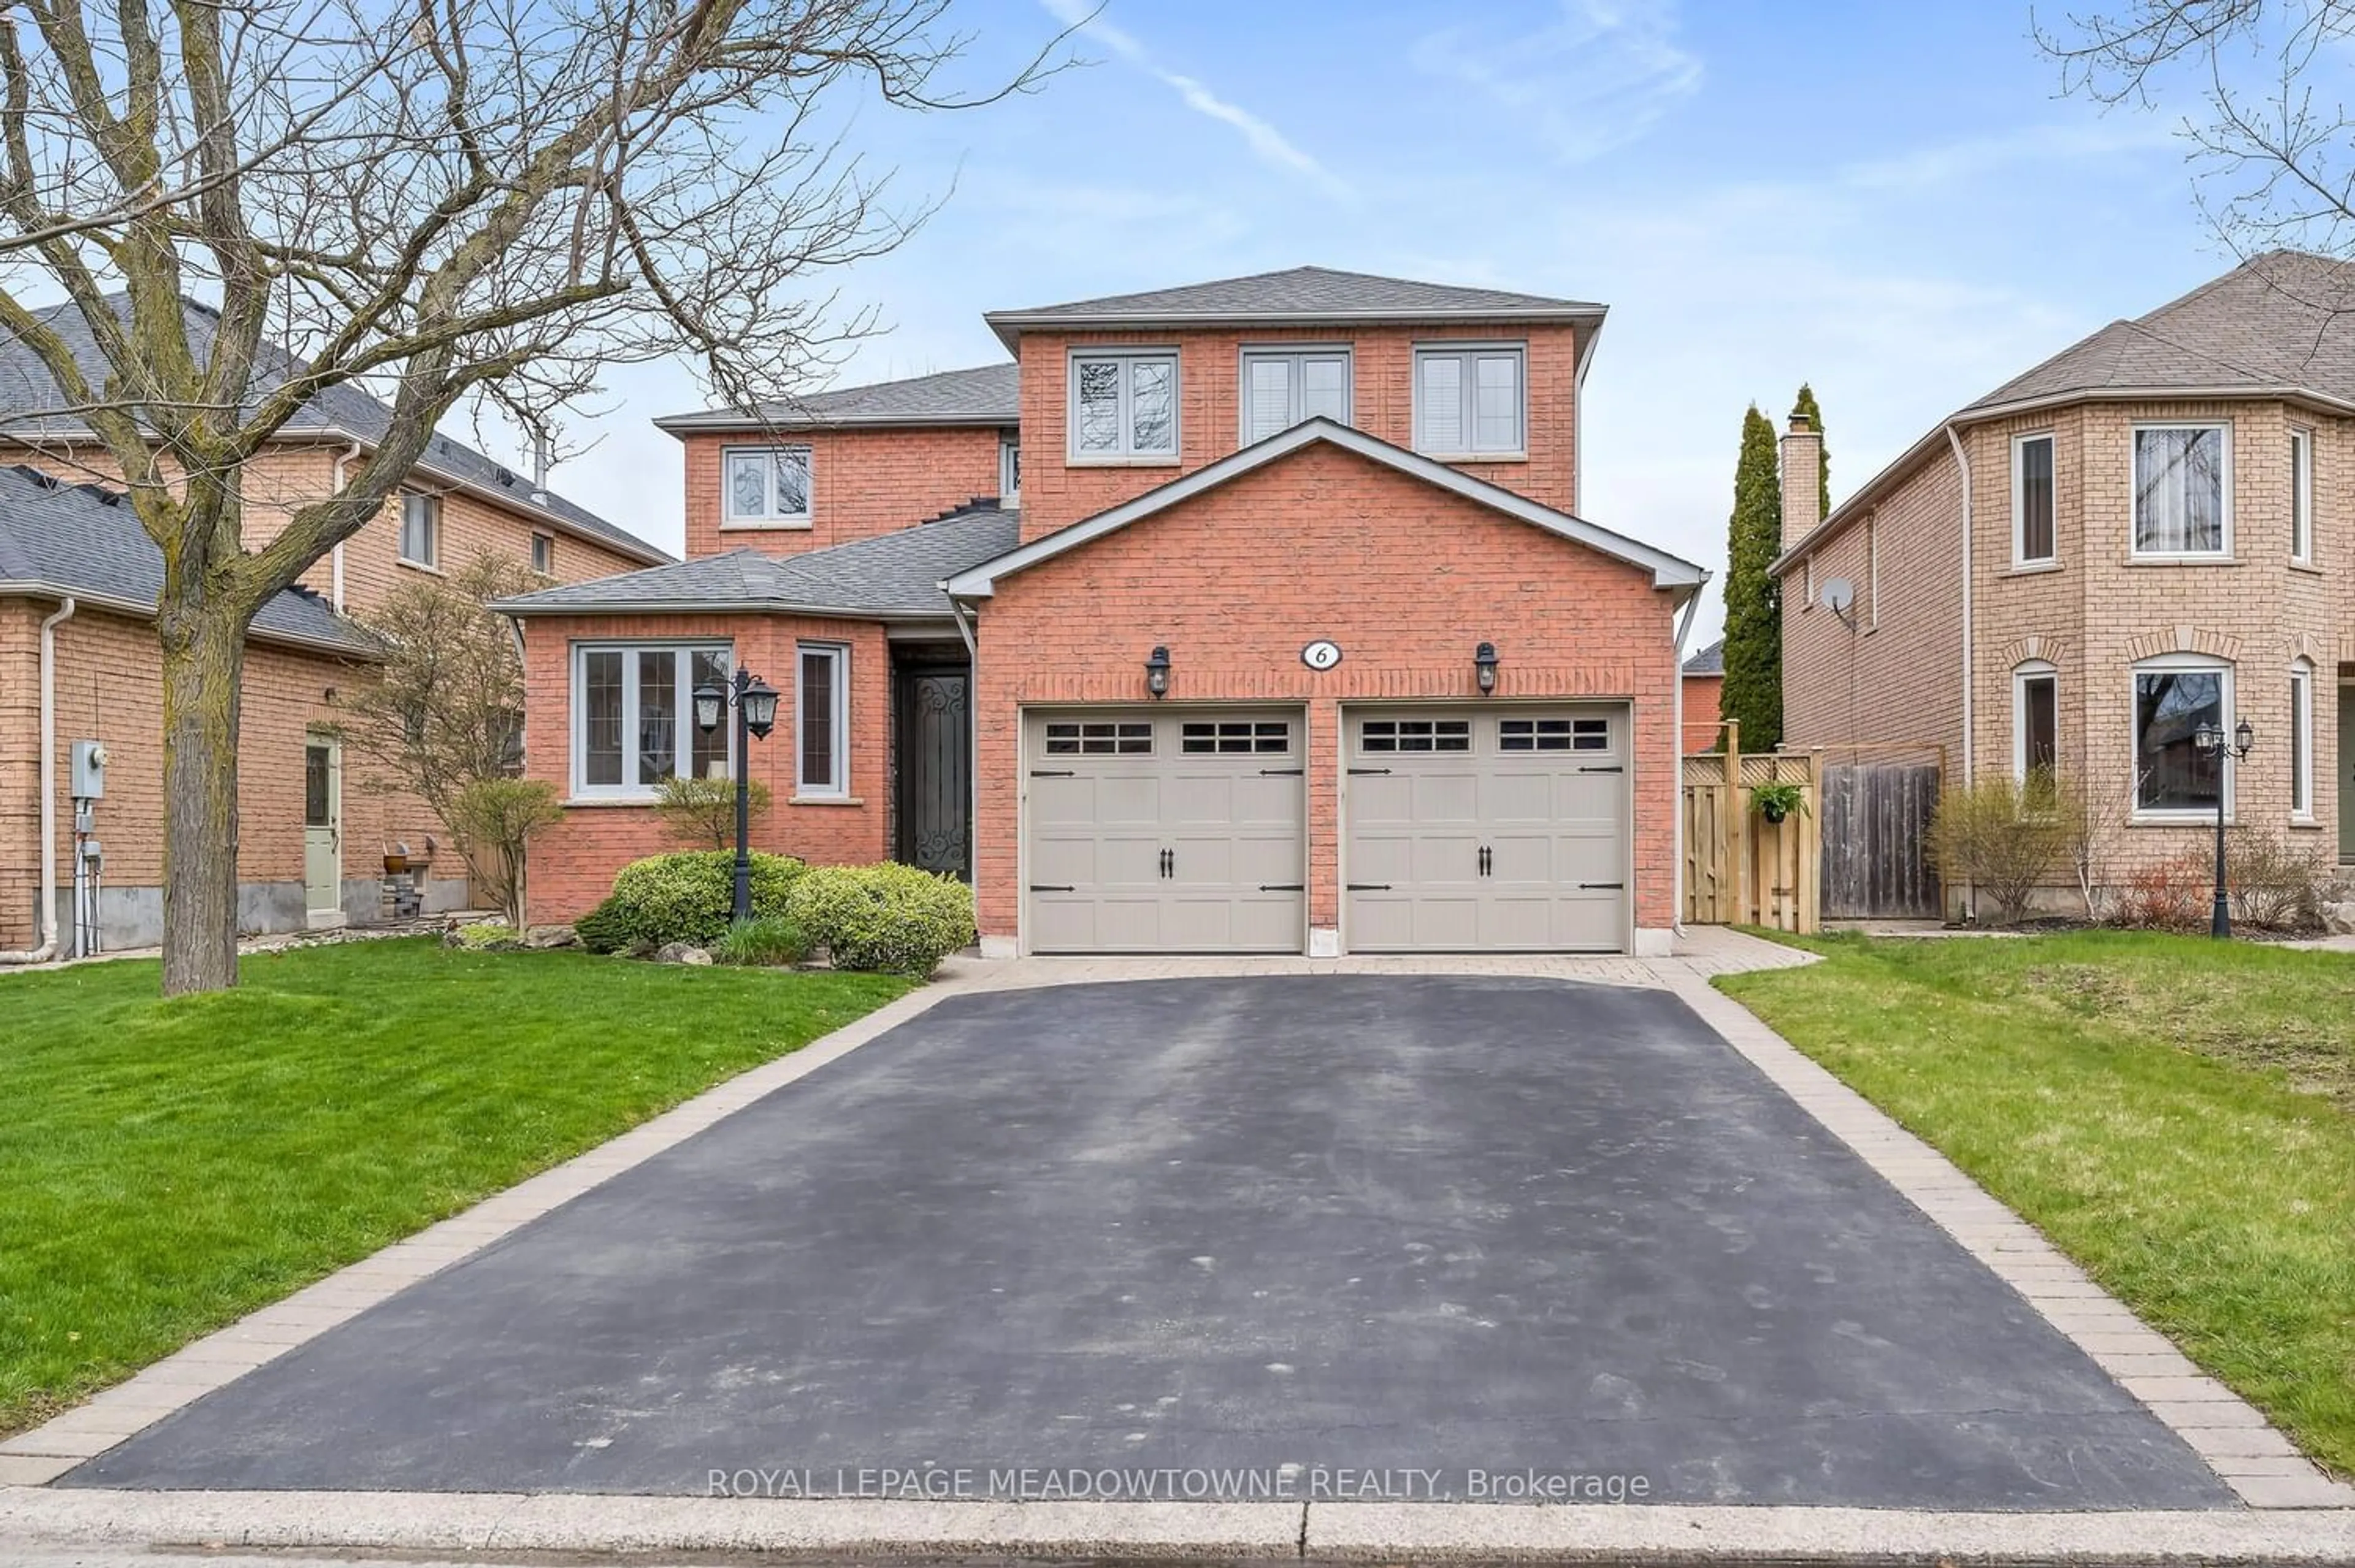 Home with brick exterior material for 6 Treanor Cres, Halton Hills Ontario L7G 5J1